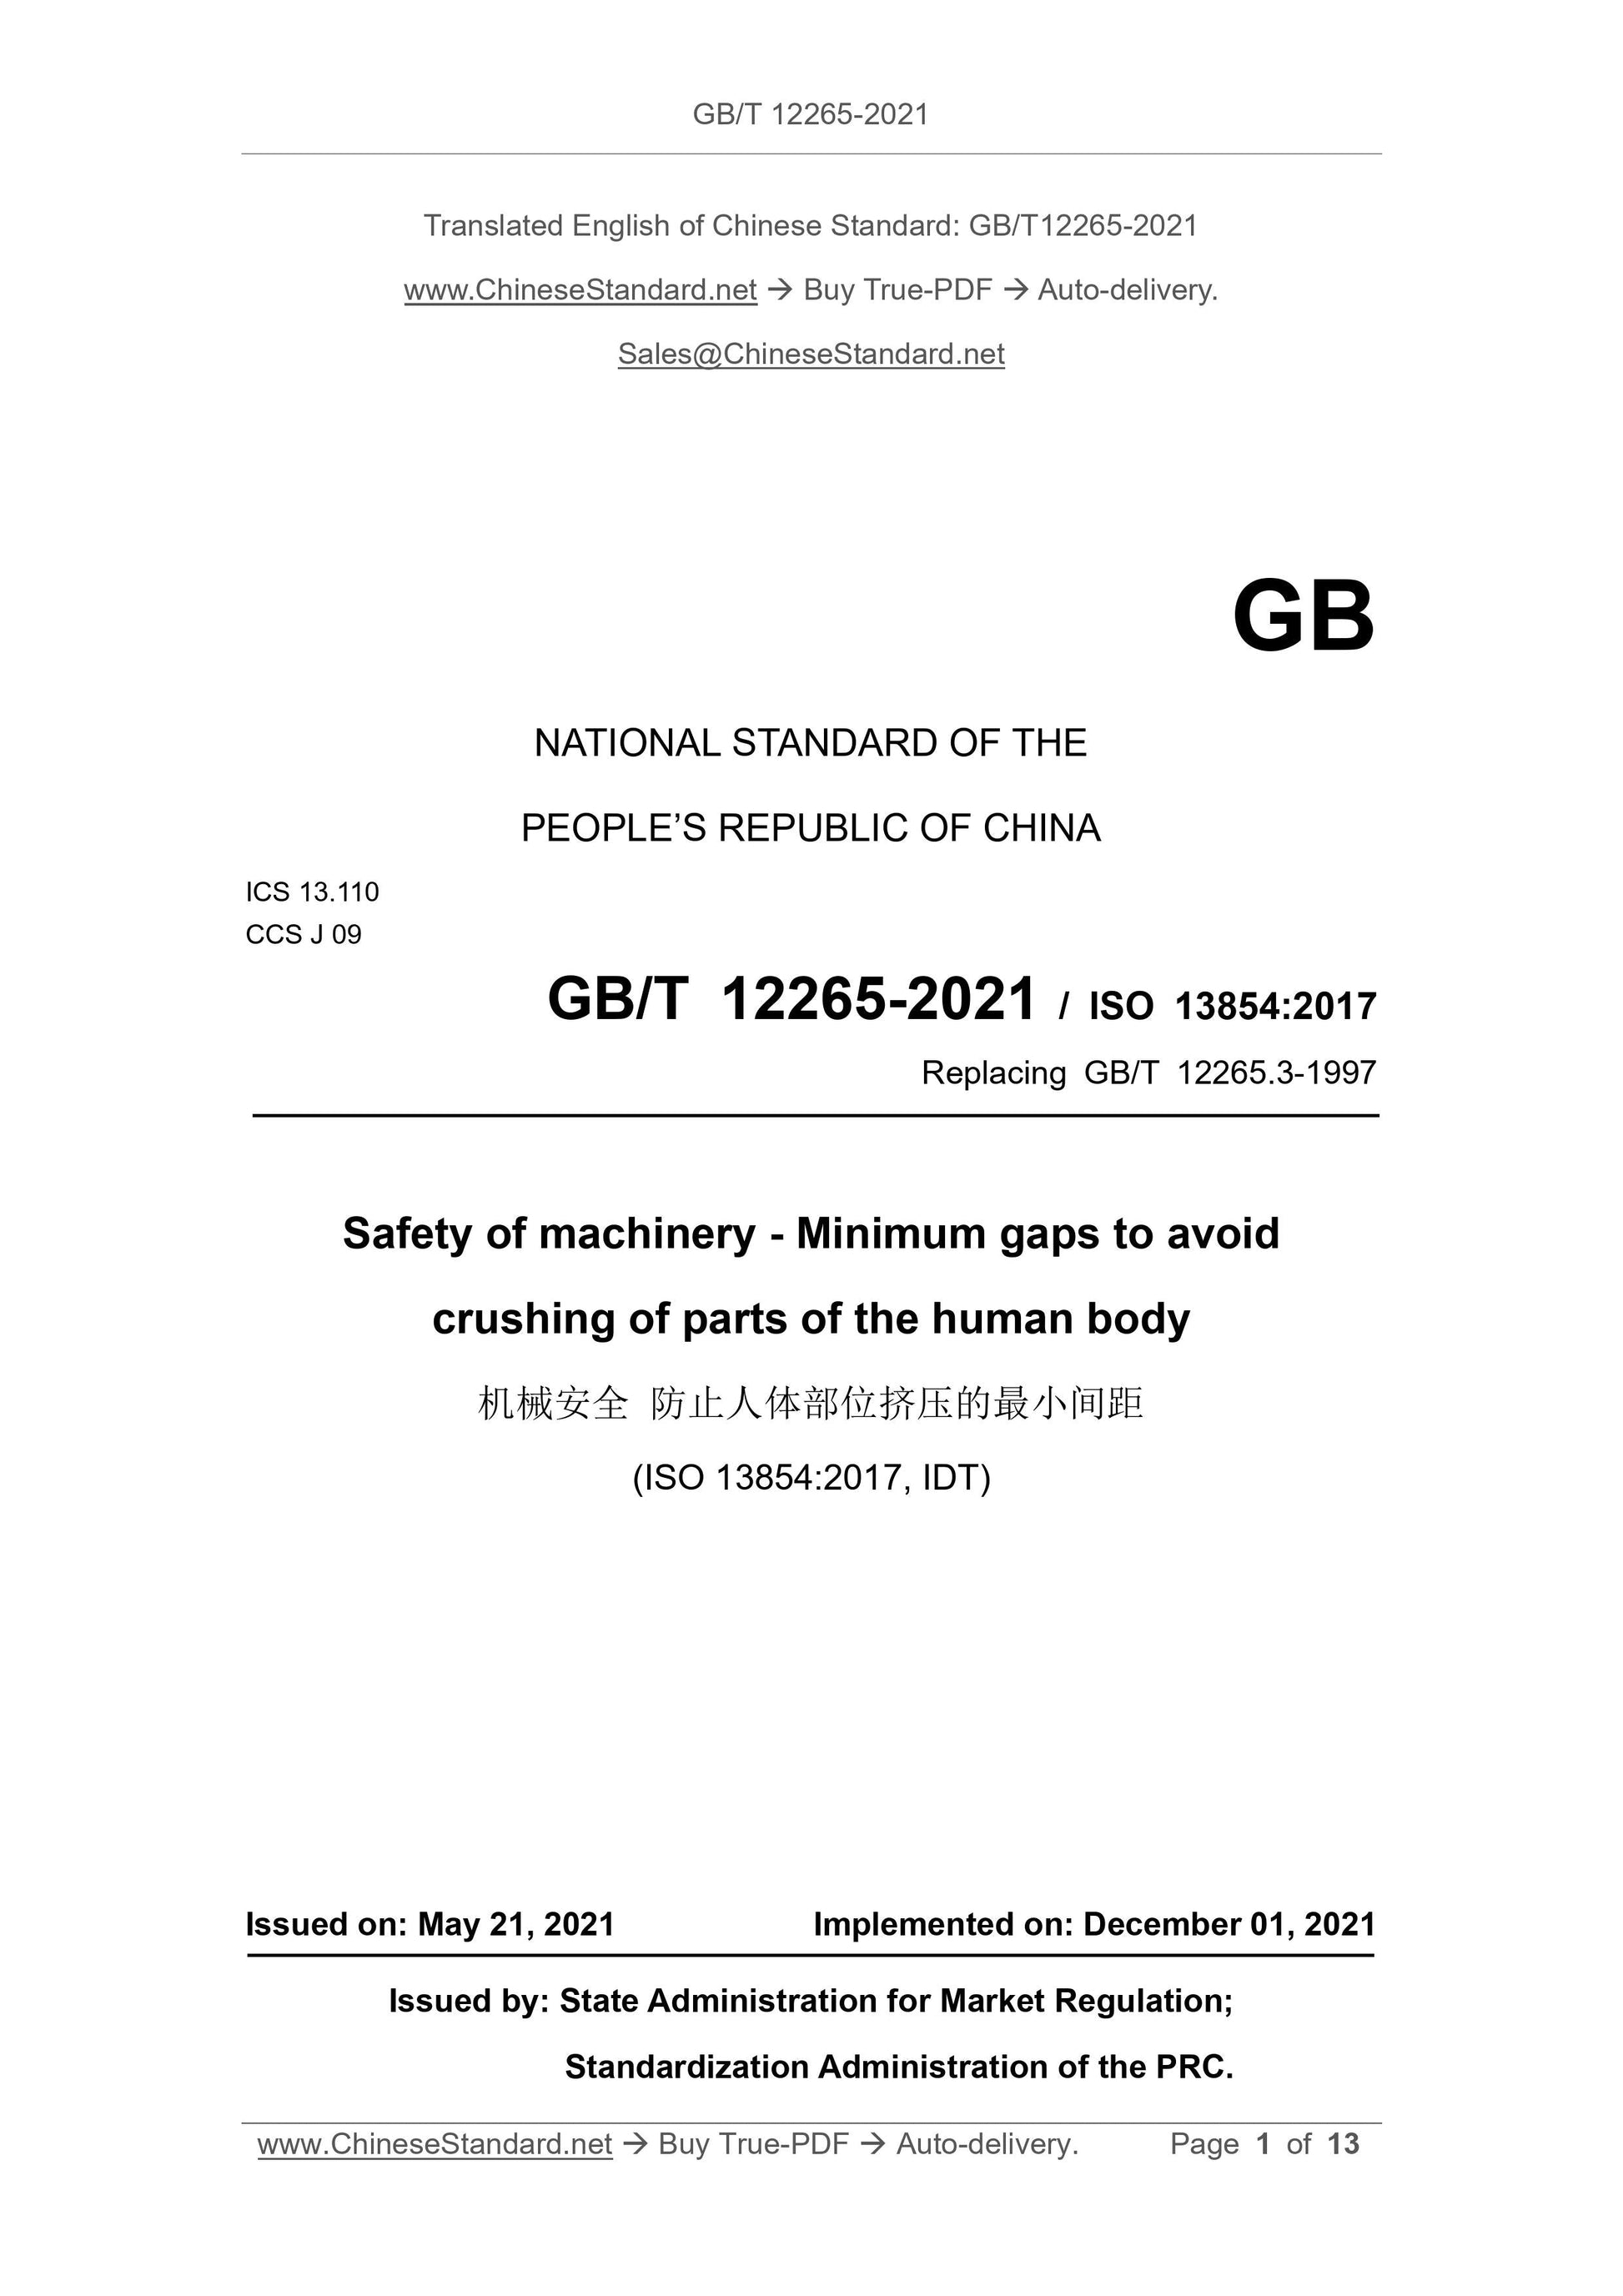 GB/T 12265-2021 Page 1